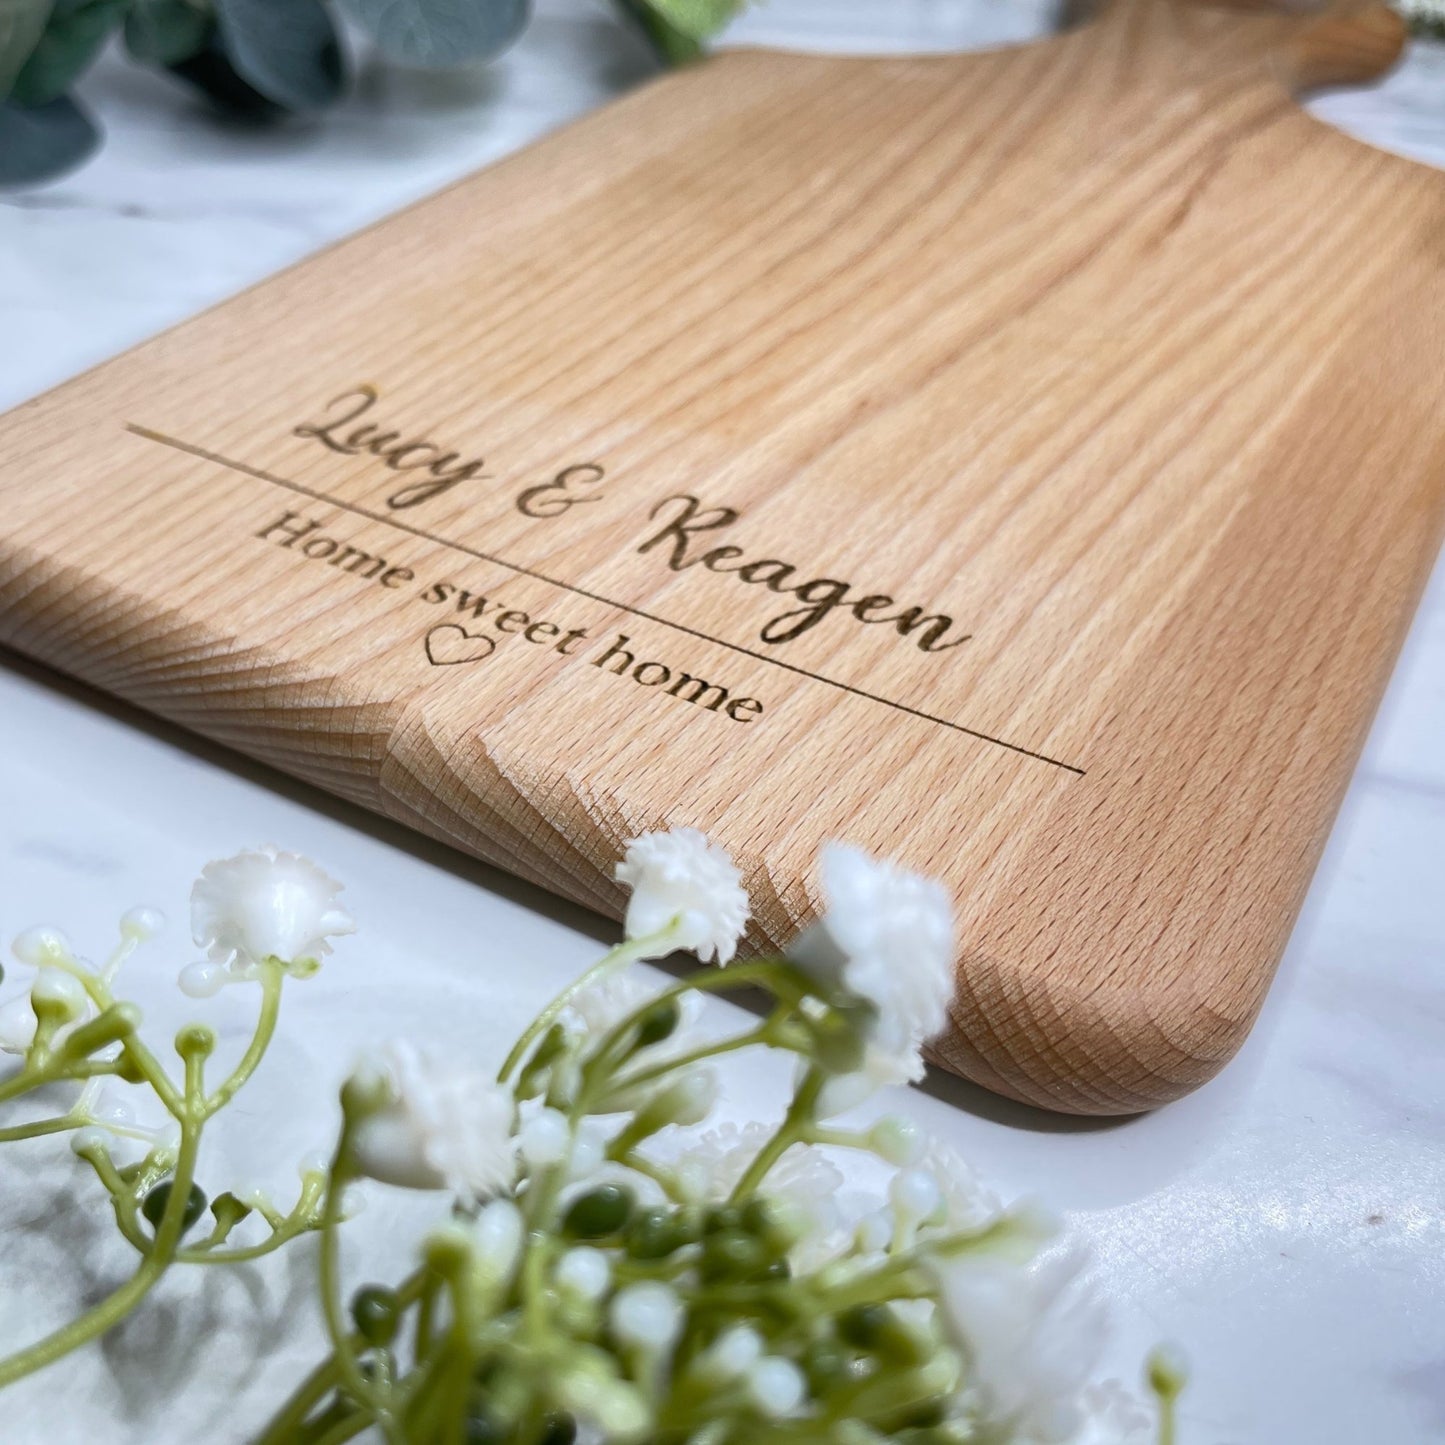 Artfully designed serving board, bearing a custom touch with the phrase 'Home Sweet Home' artistically intertwined with a heart illustration. Ideal for gifting on weddings, anniversaries, birthdays, or any heartfelt moment deserving remembrance.